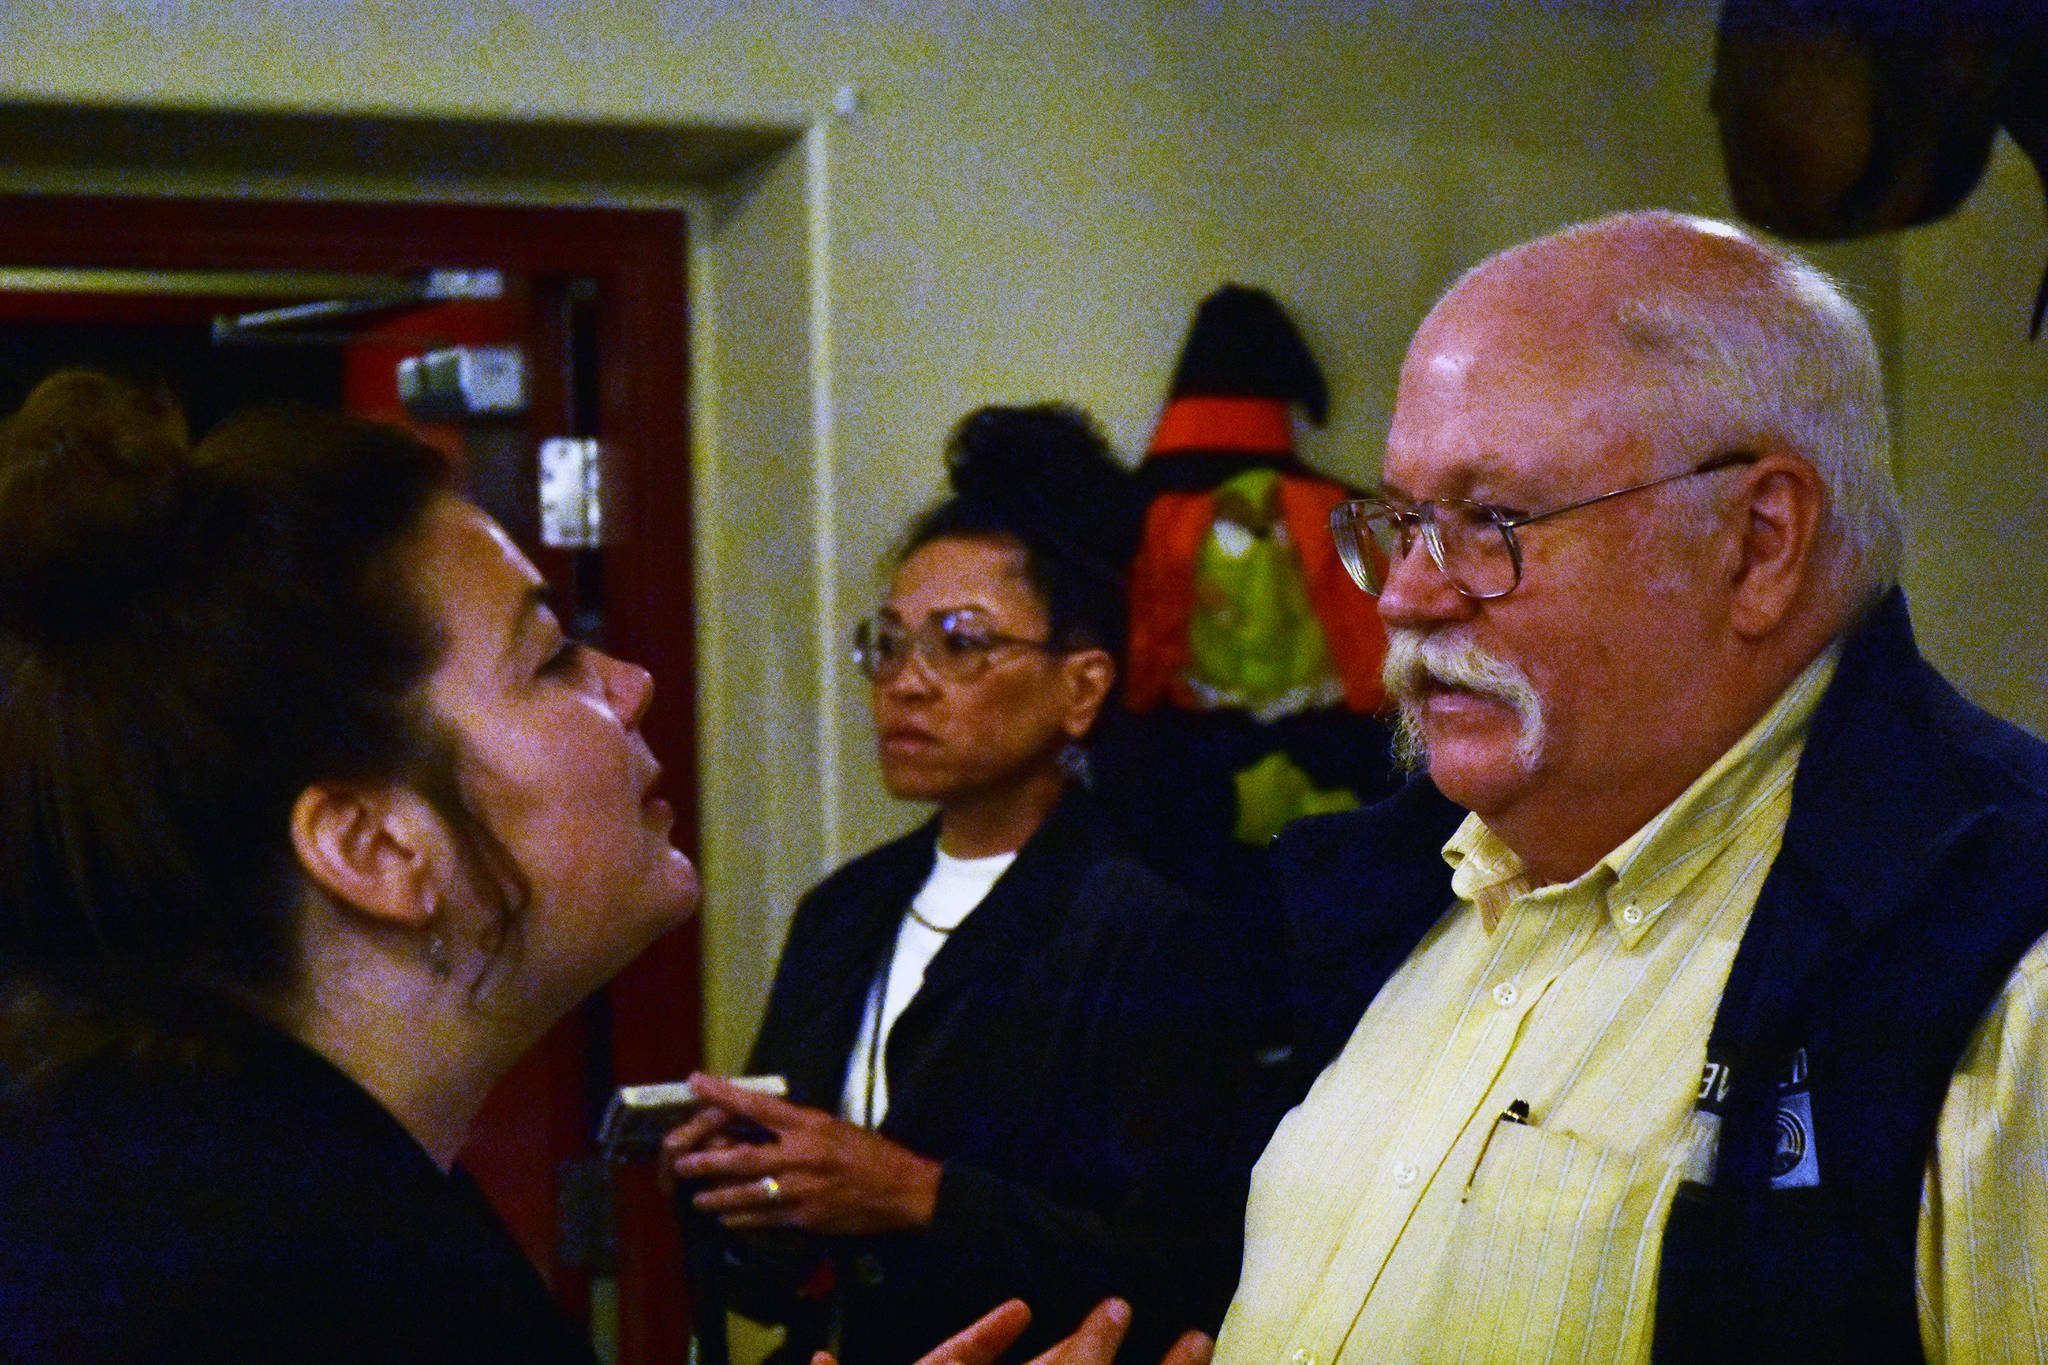 Wayne Stevens, right, president and CEO of United Way of Southeast Alaska, greets a person at the Juneau Chamber of Commerce Luncheon at the Moose Family Lodge on Thursday, Oct. 17, 2019. Stevens retired as head of the organization last month, but remains active in its causes. (Peter Segall / Juneau Empire File)